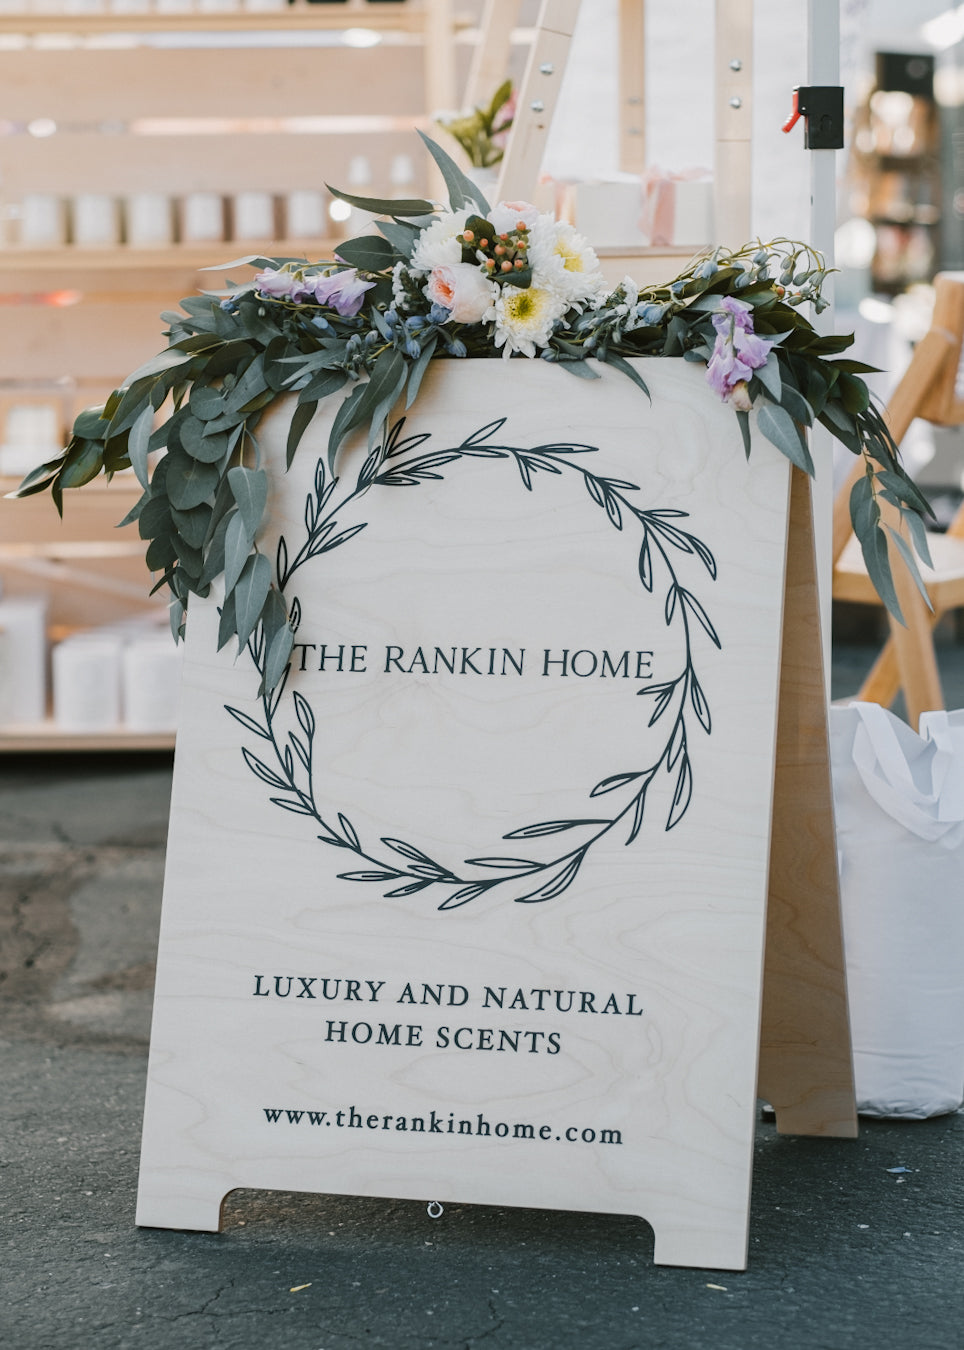 Wooden sandwich board by Milimetry for The Rankin Home Luxury and Natural Home Scents